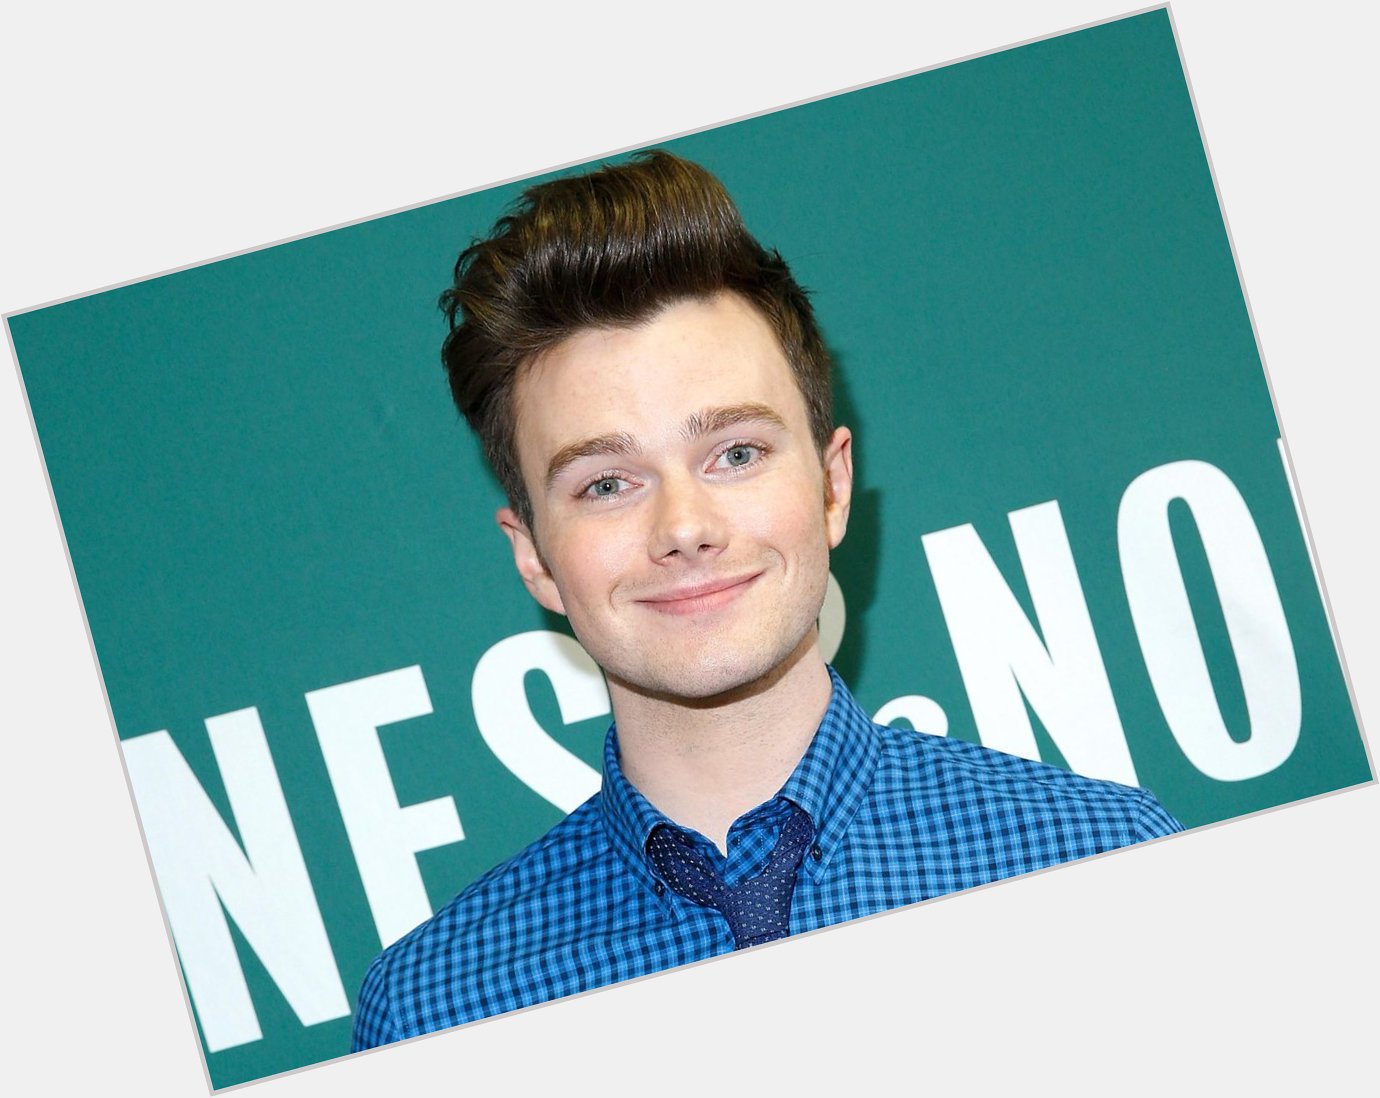 Happy birthday to Chris Colfer, who turns 30 today! Chris is best known for his role as Kurt Hummel on Glee. 